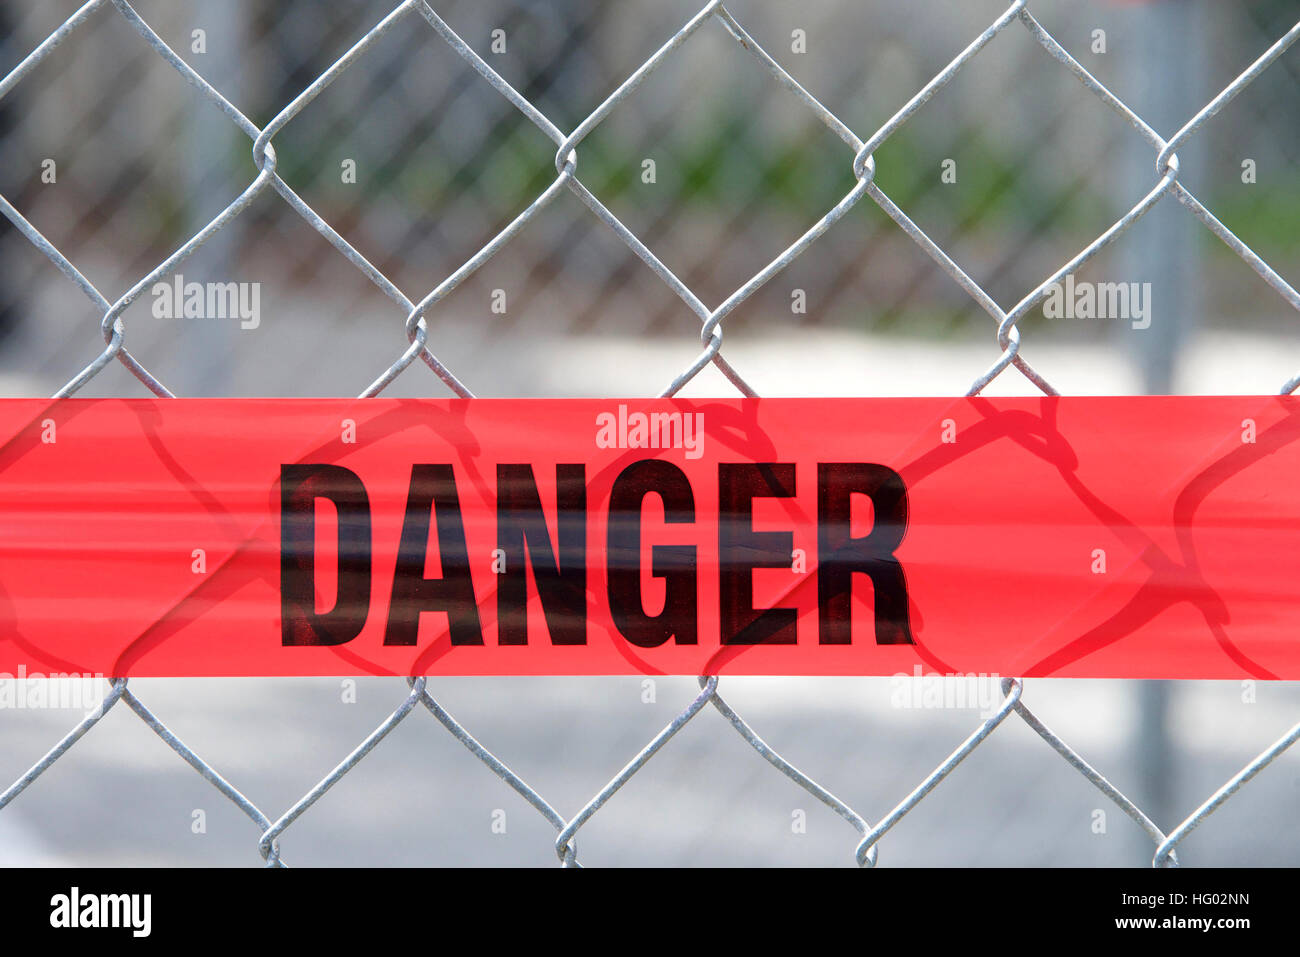 Red reflective danger barrier tape across a chain link fence to keep pedestrians out of construction zone, close up on word danger Stock Photo